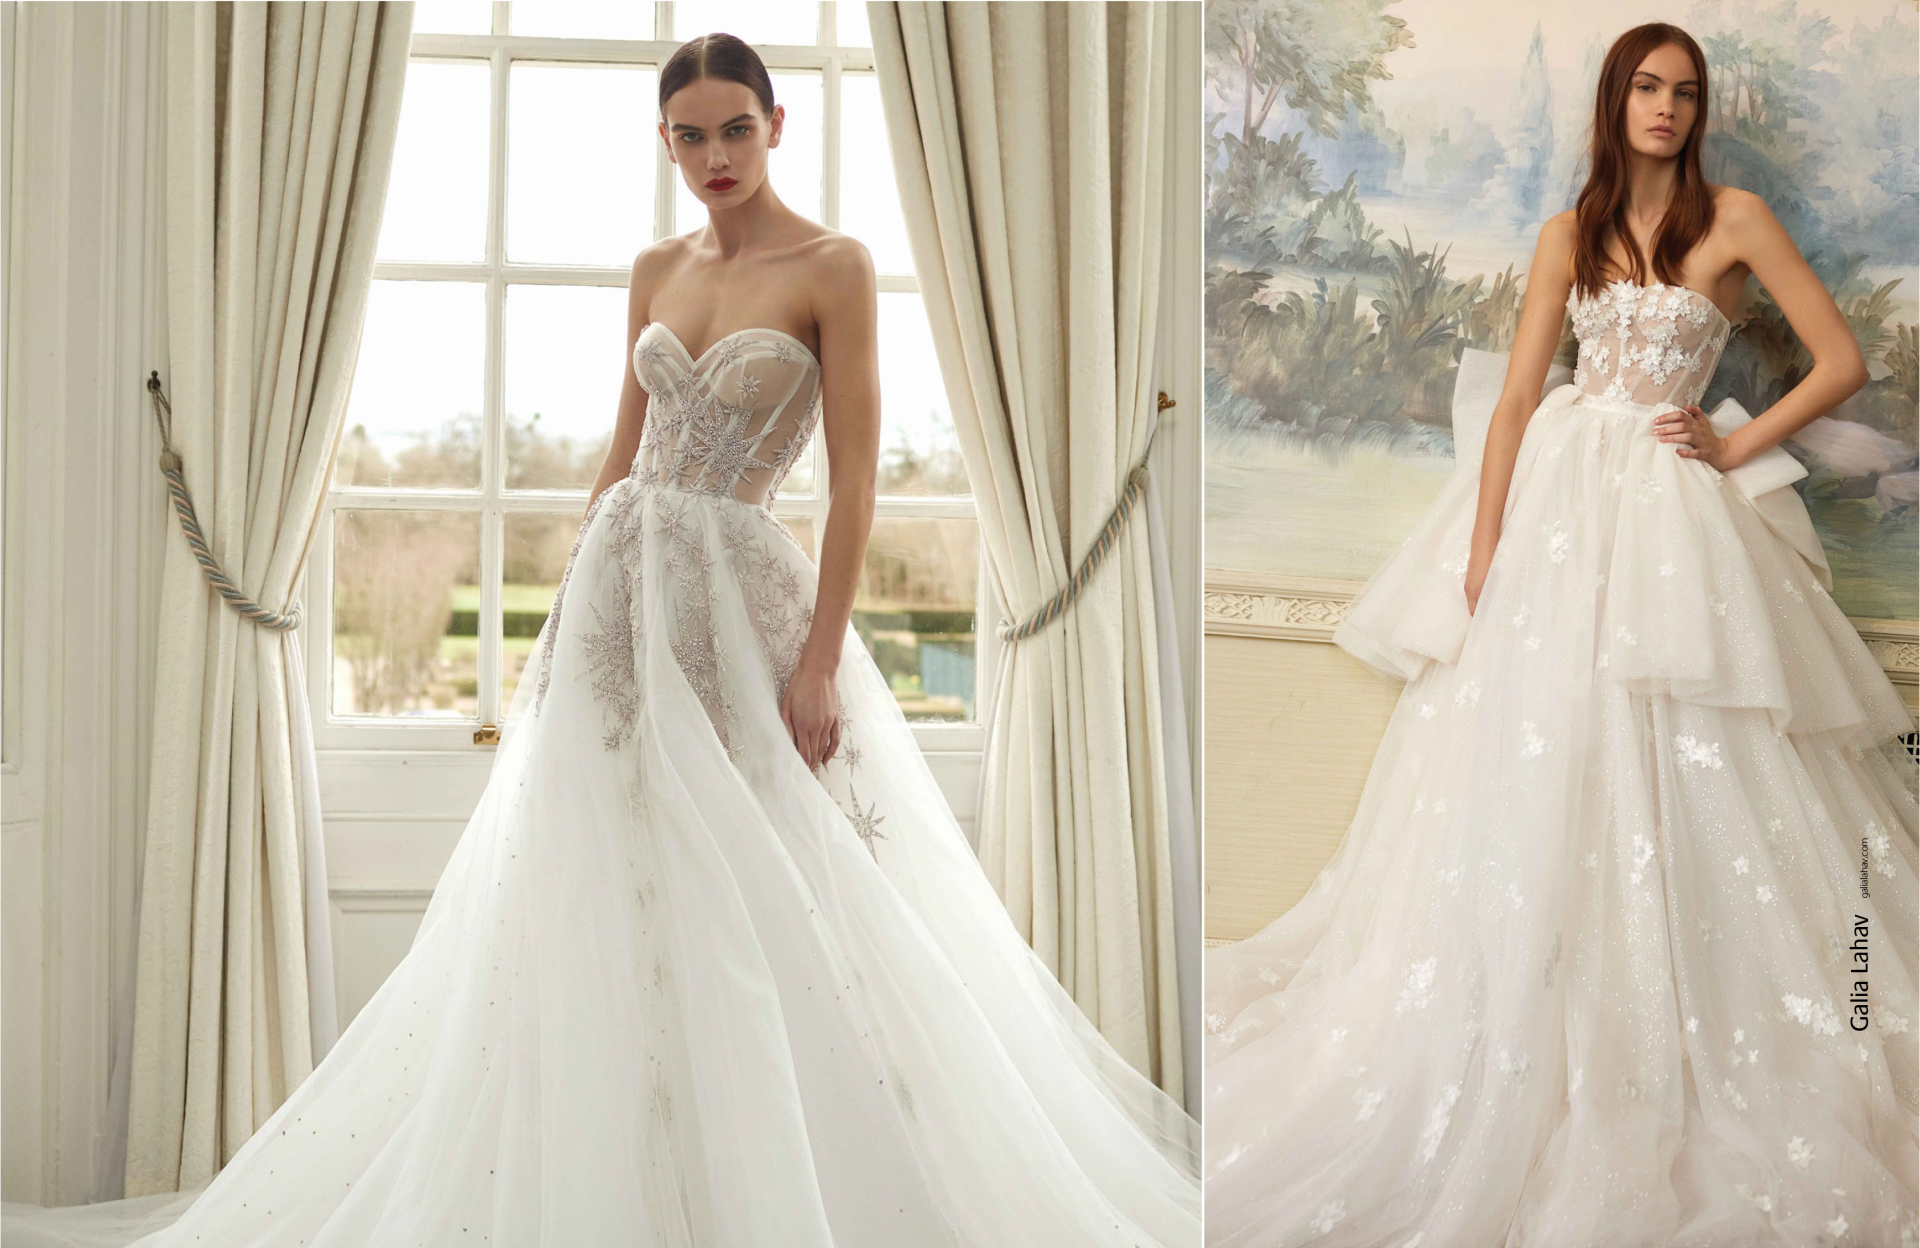 ANNA PAVLOVA INSPIRED GALIA LAHAV'S 2021 DANCING QUEEN BRIDAL COUTURE  COLLECTION